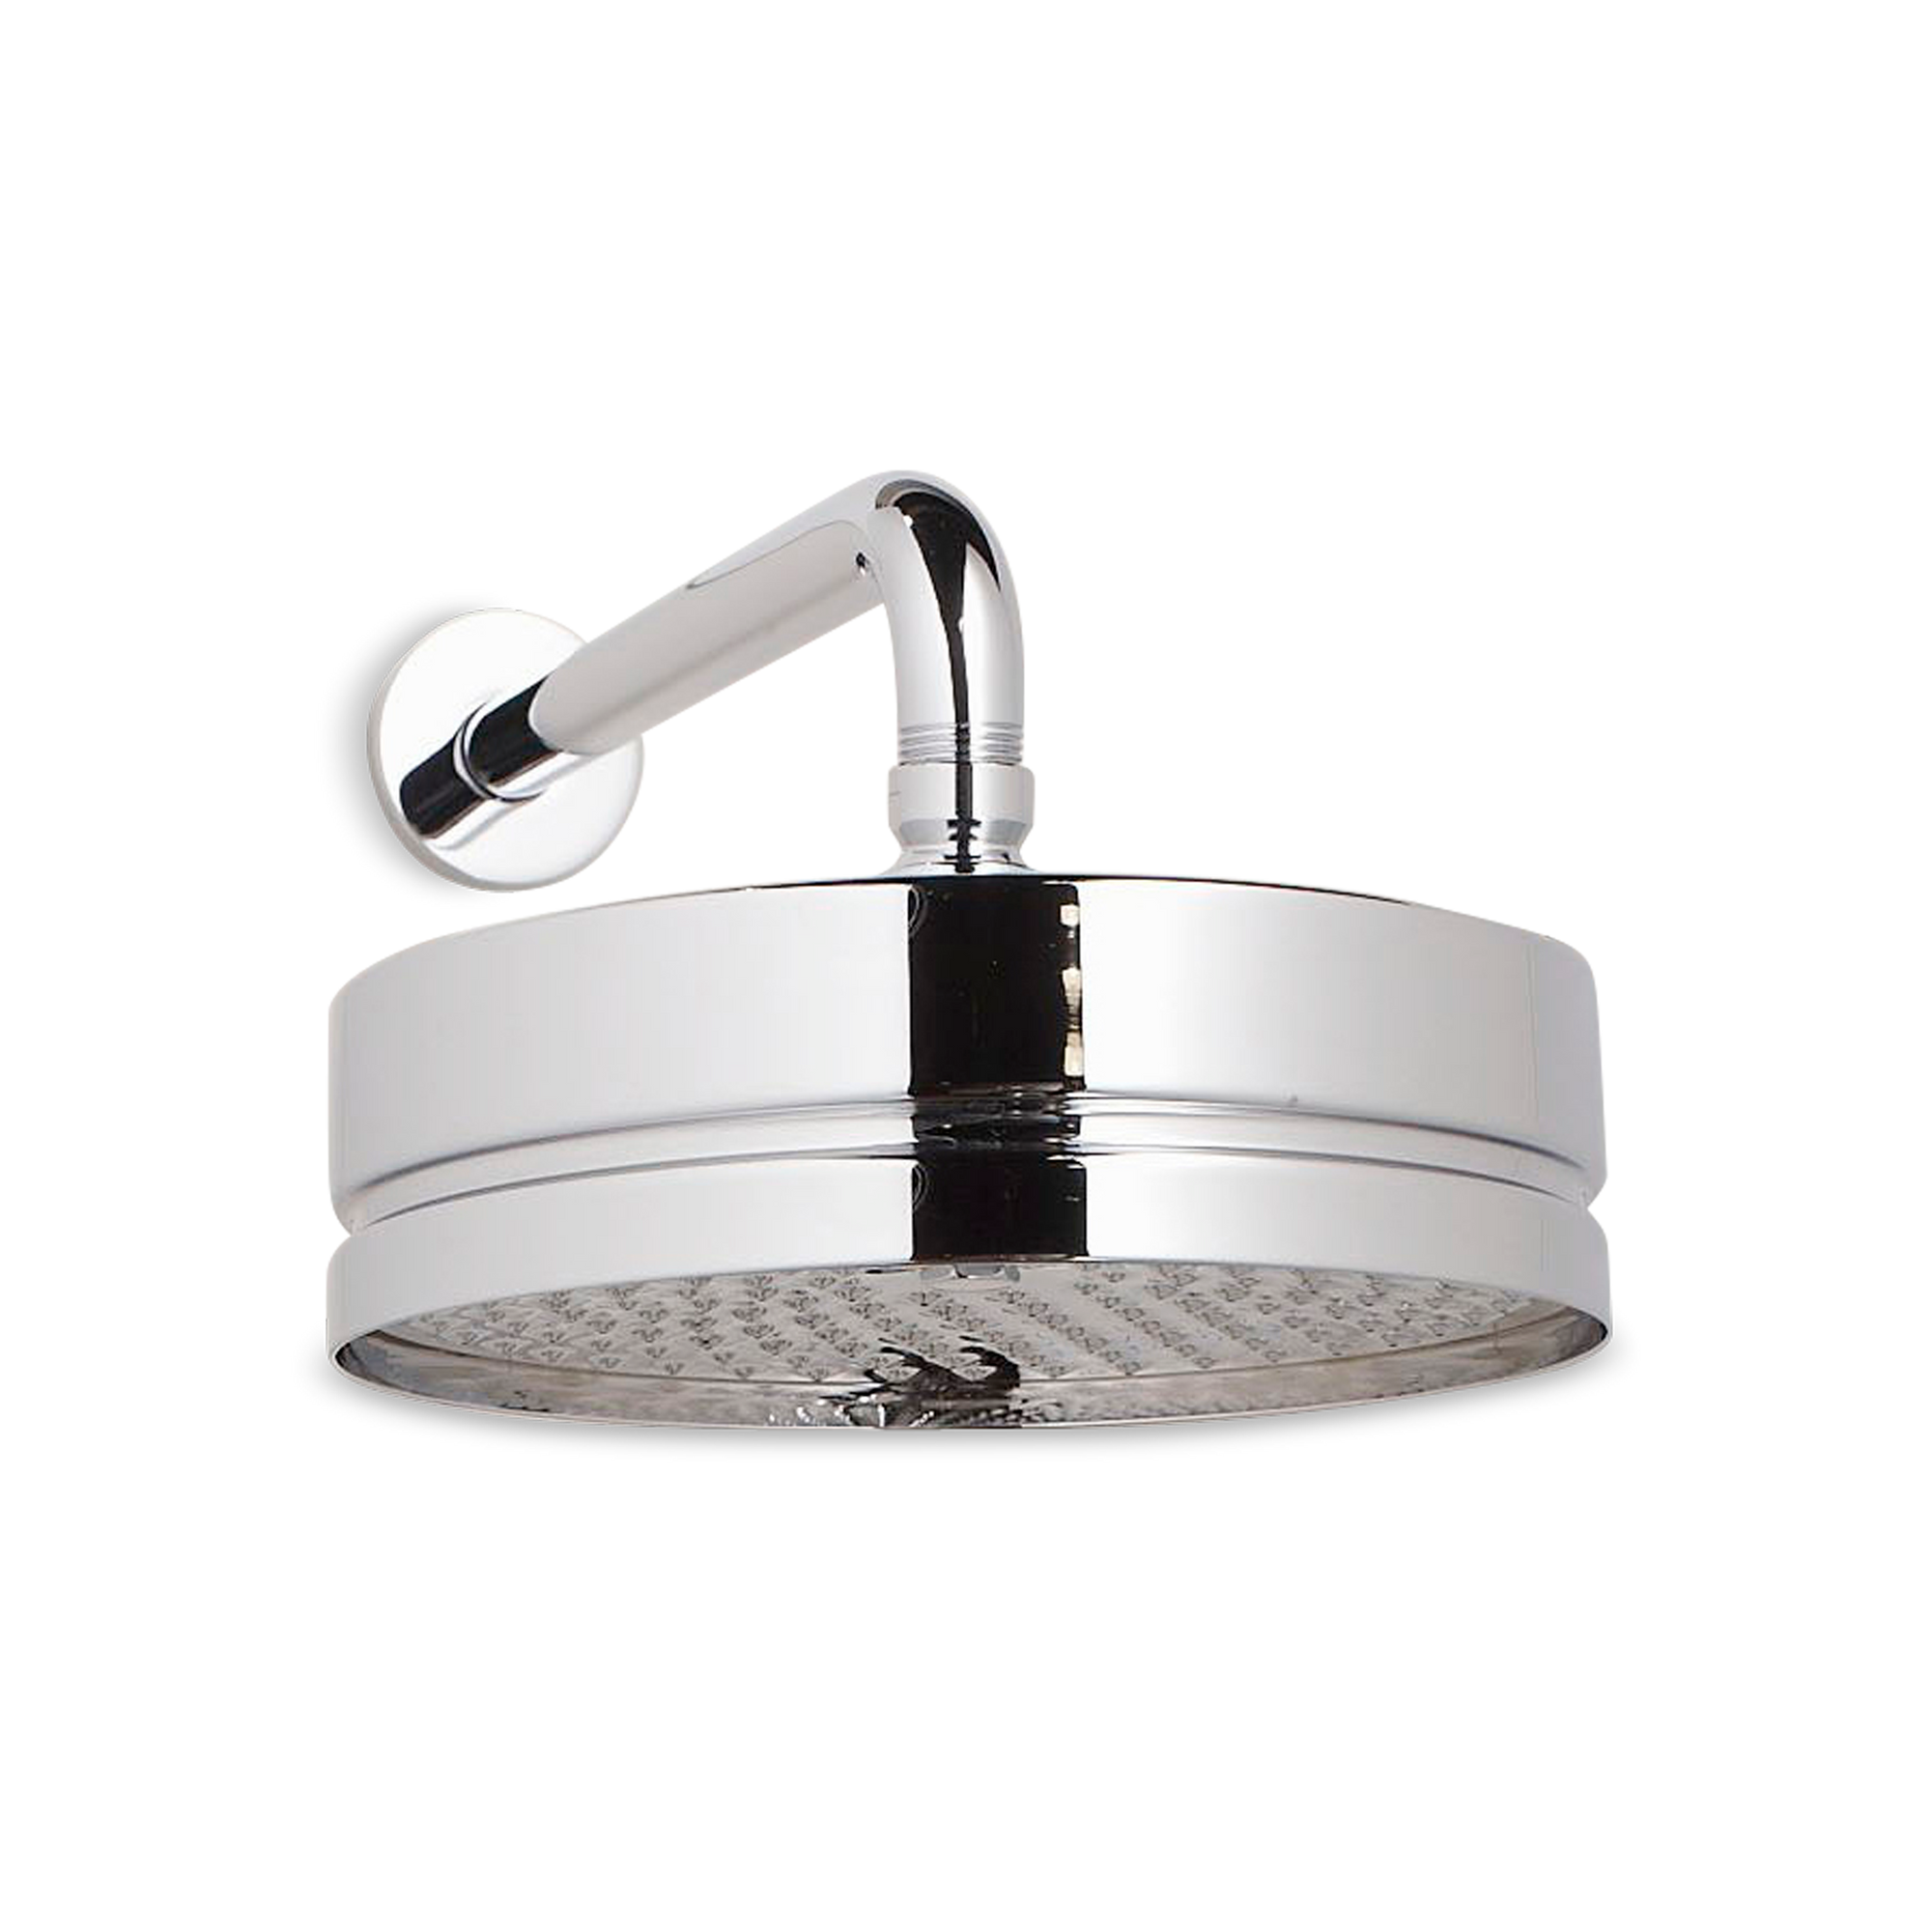 A contemporary rain shower head with ridge detailing and swivel ball.